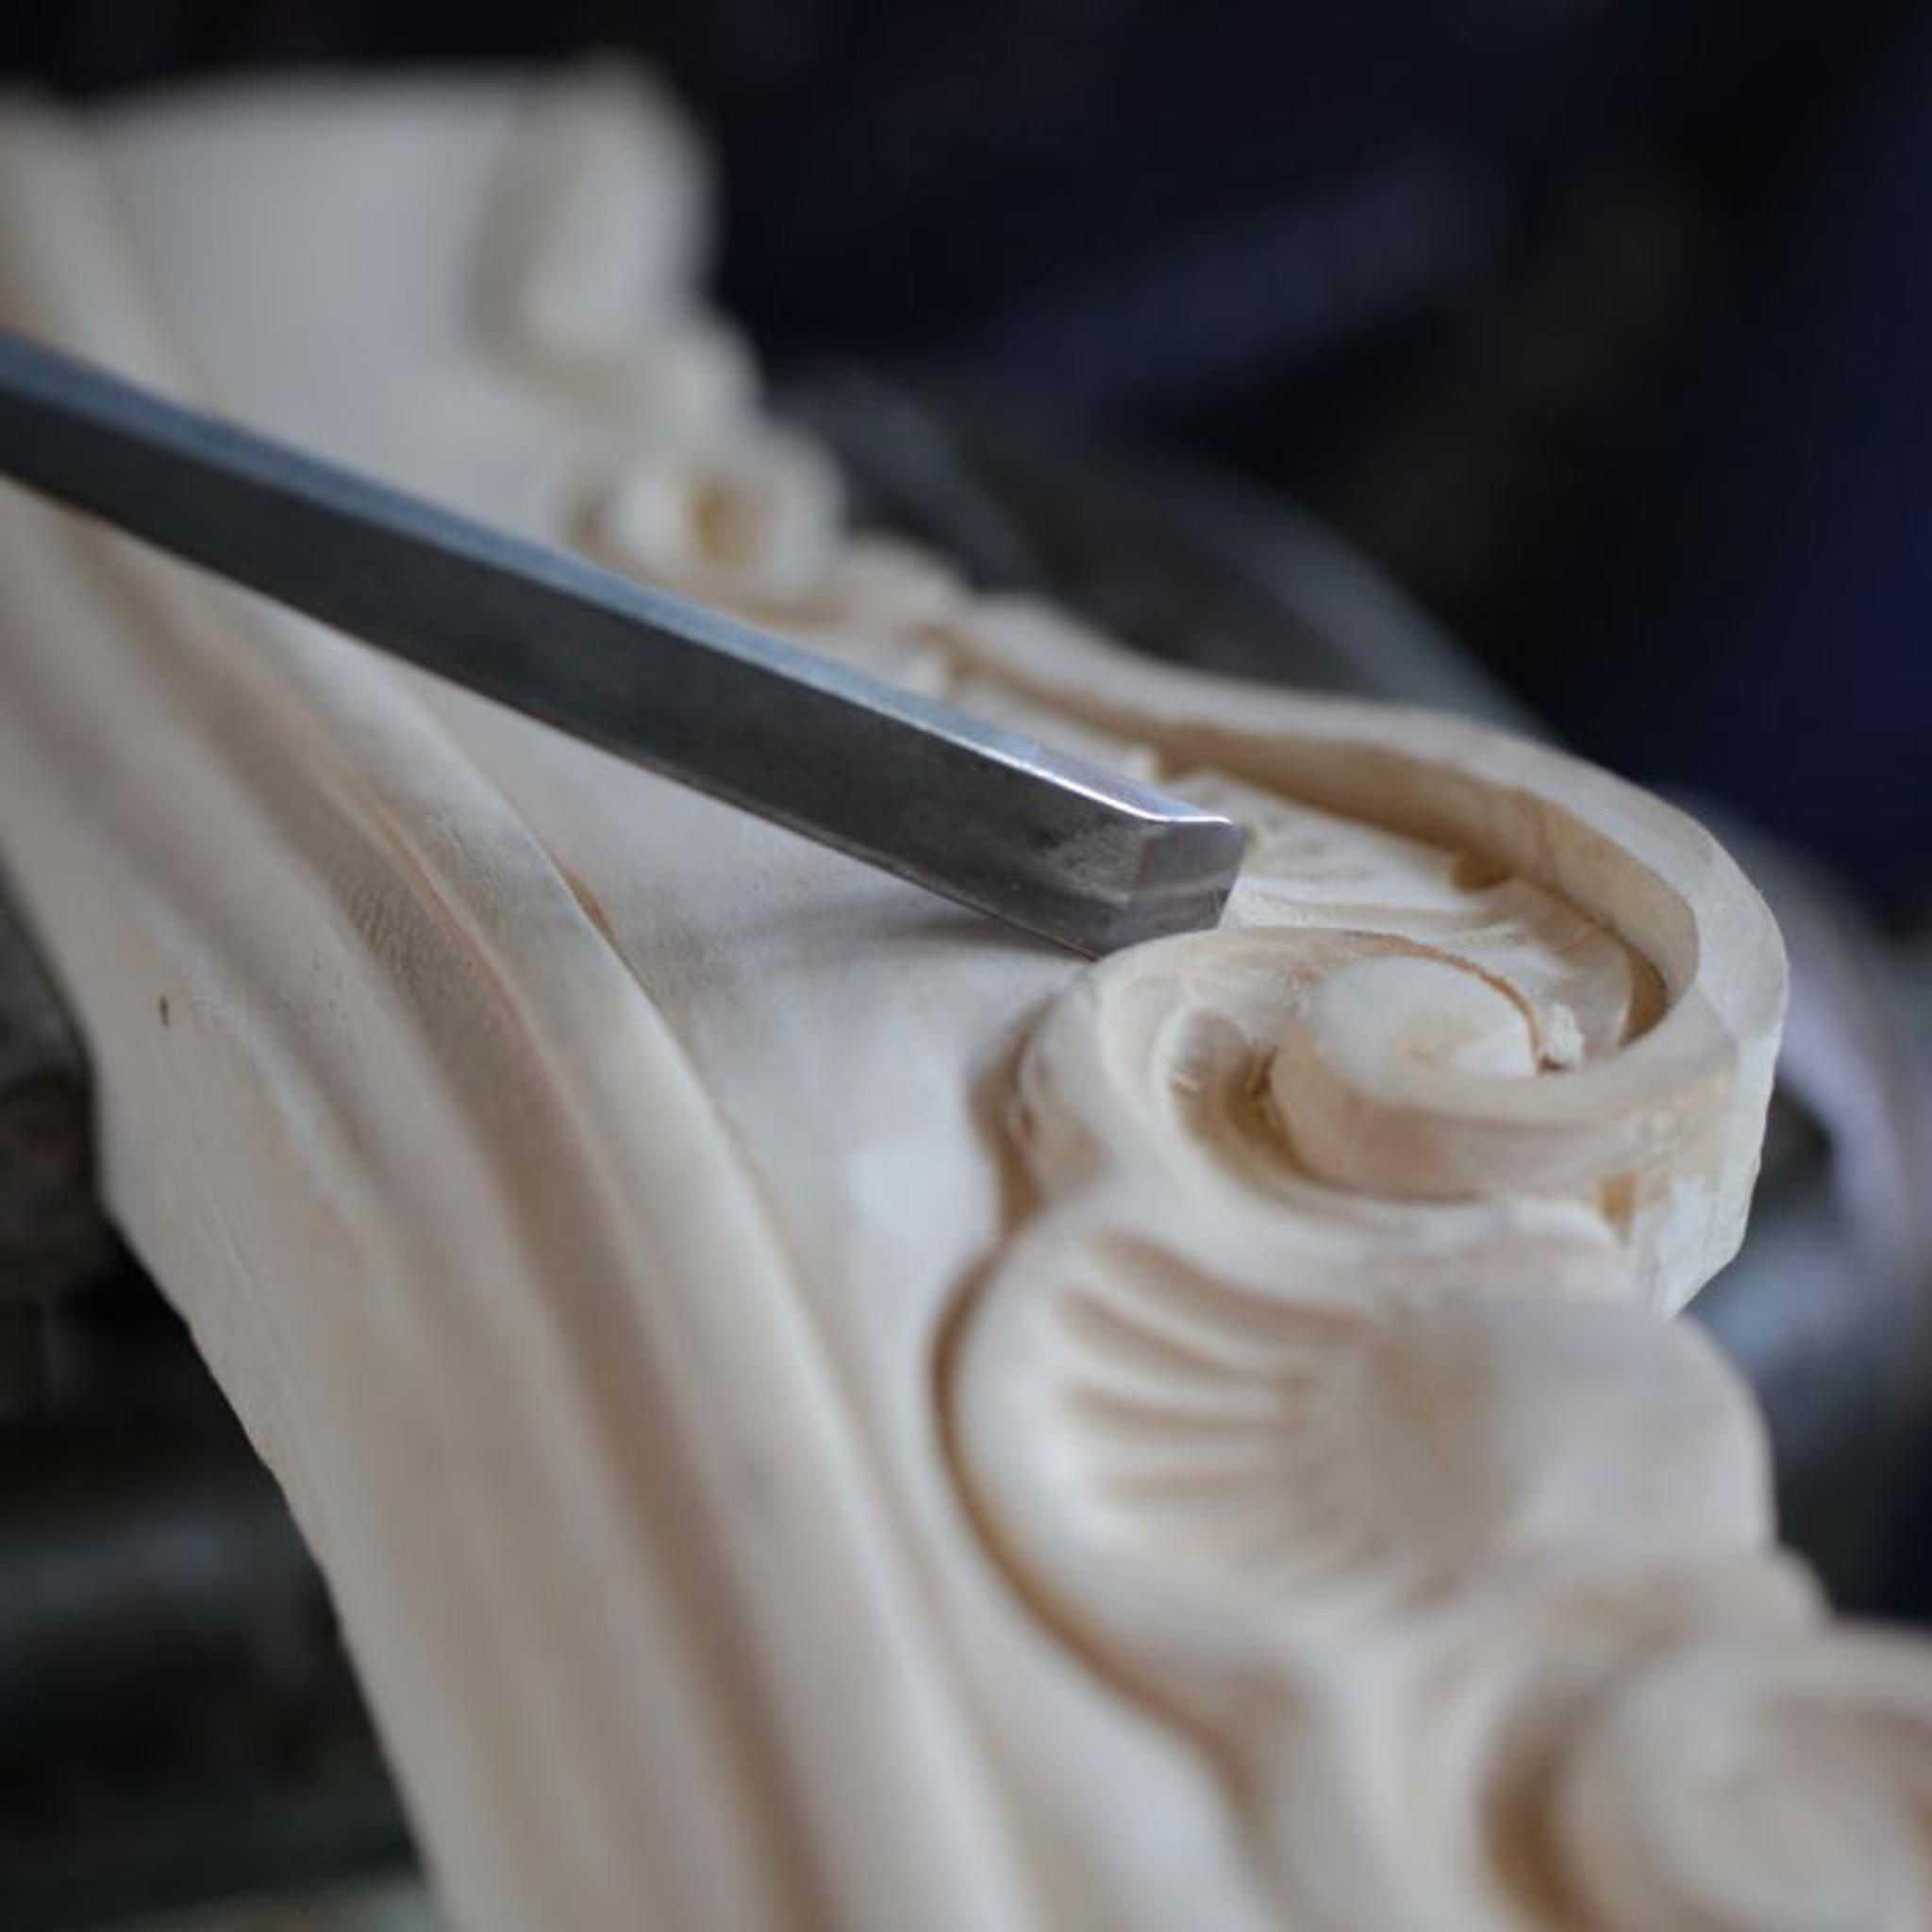 Precisely carving the details